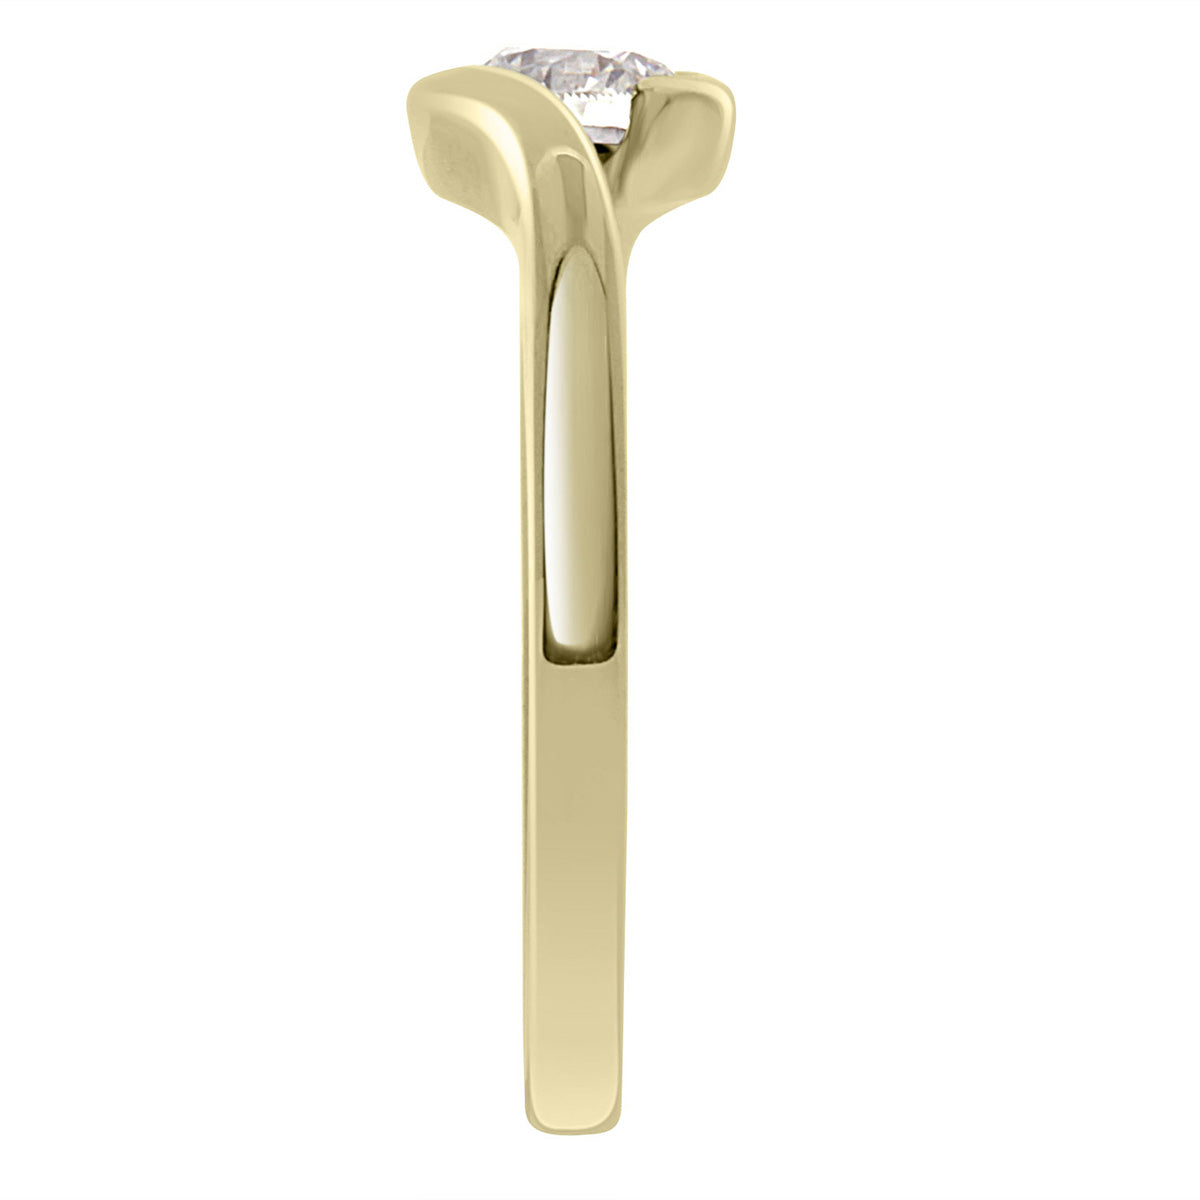 Tension Set Diamond Ring made in yellow gold in an upright position